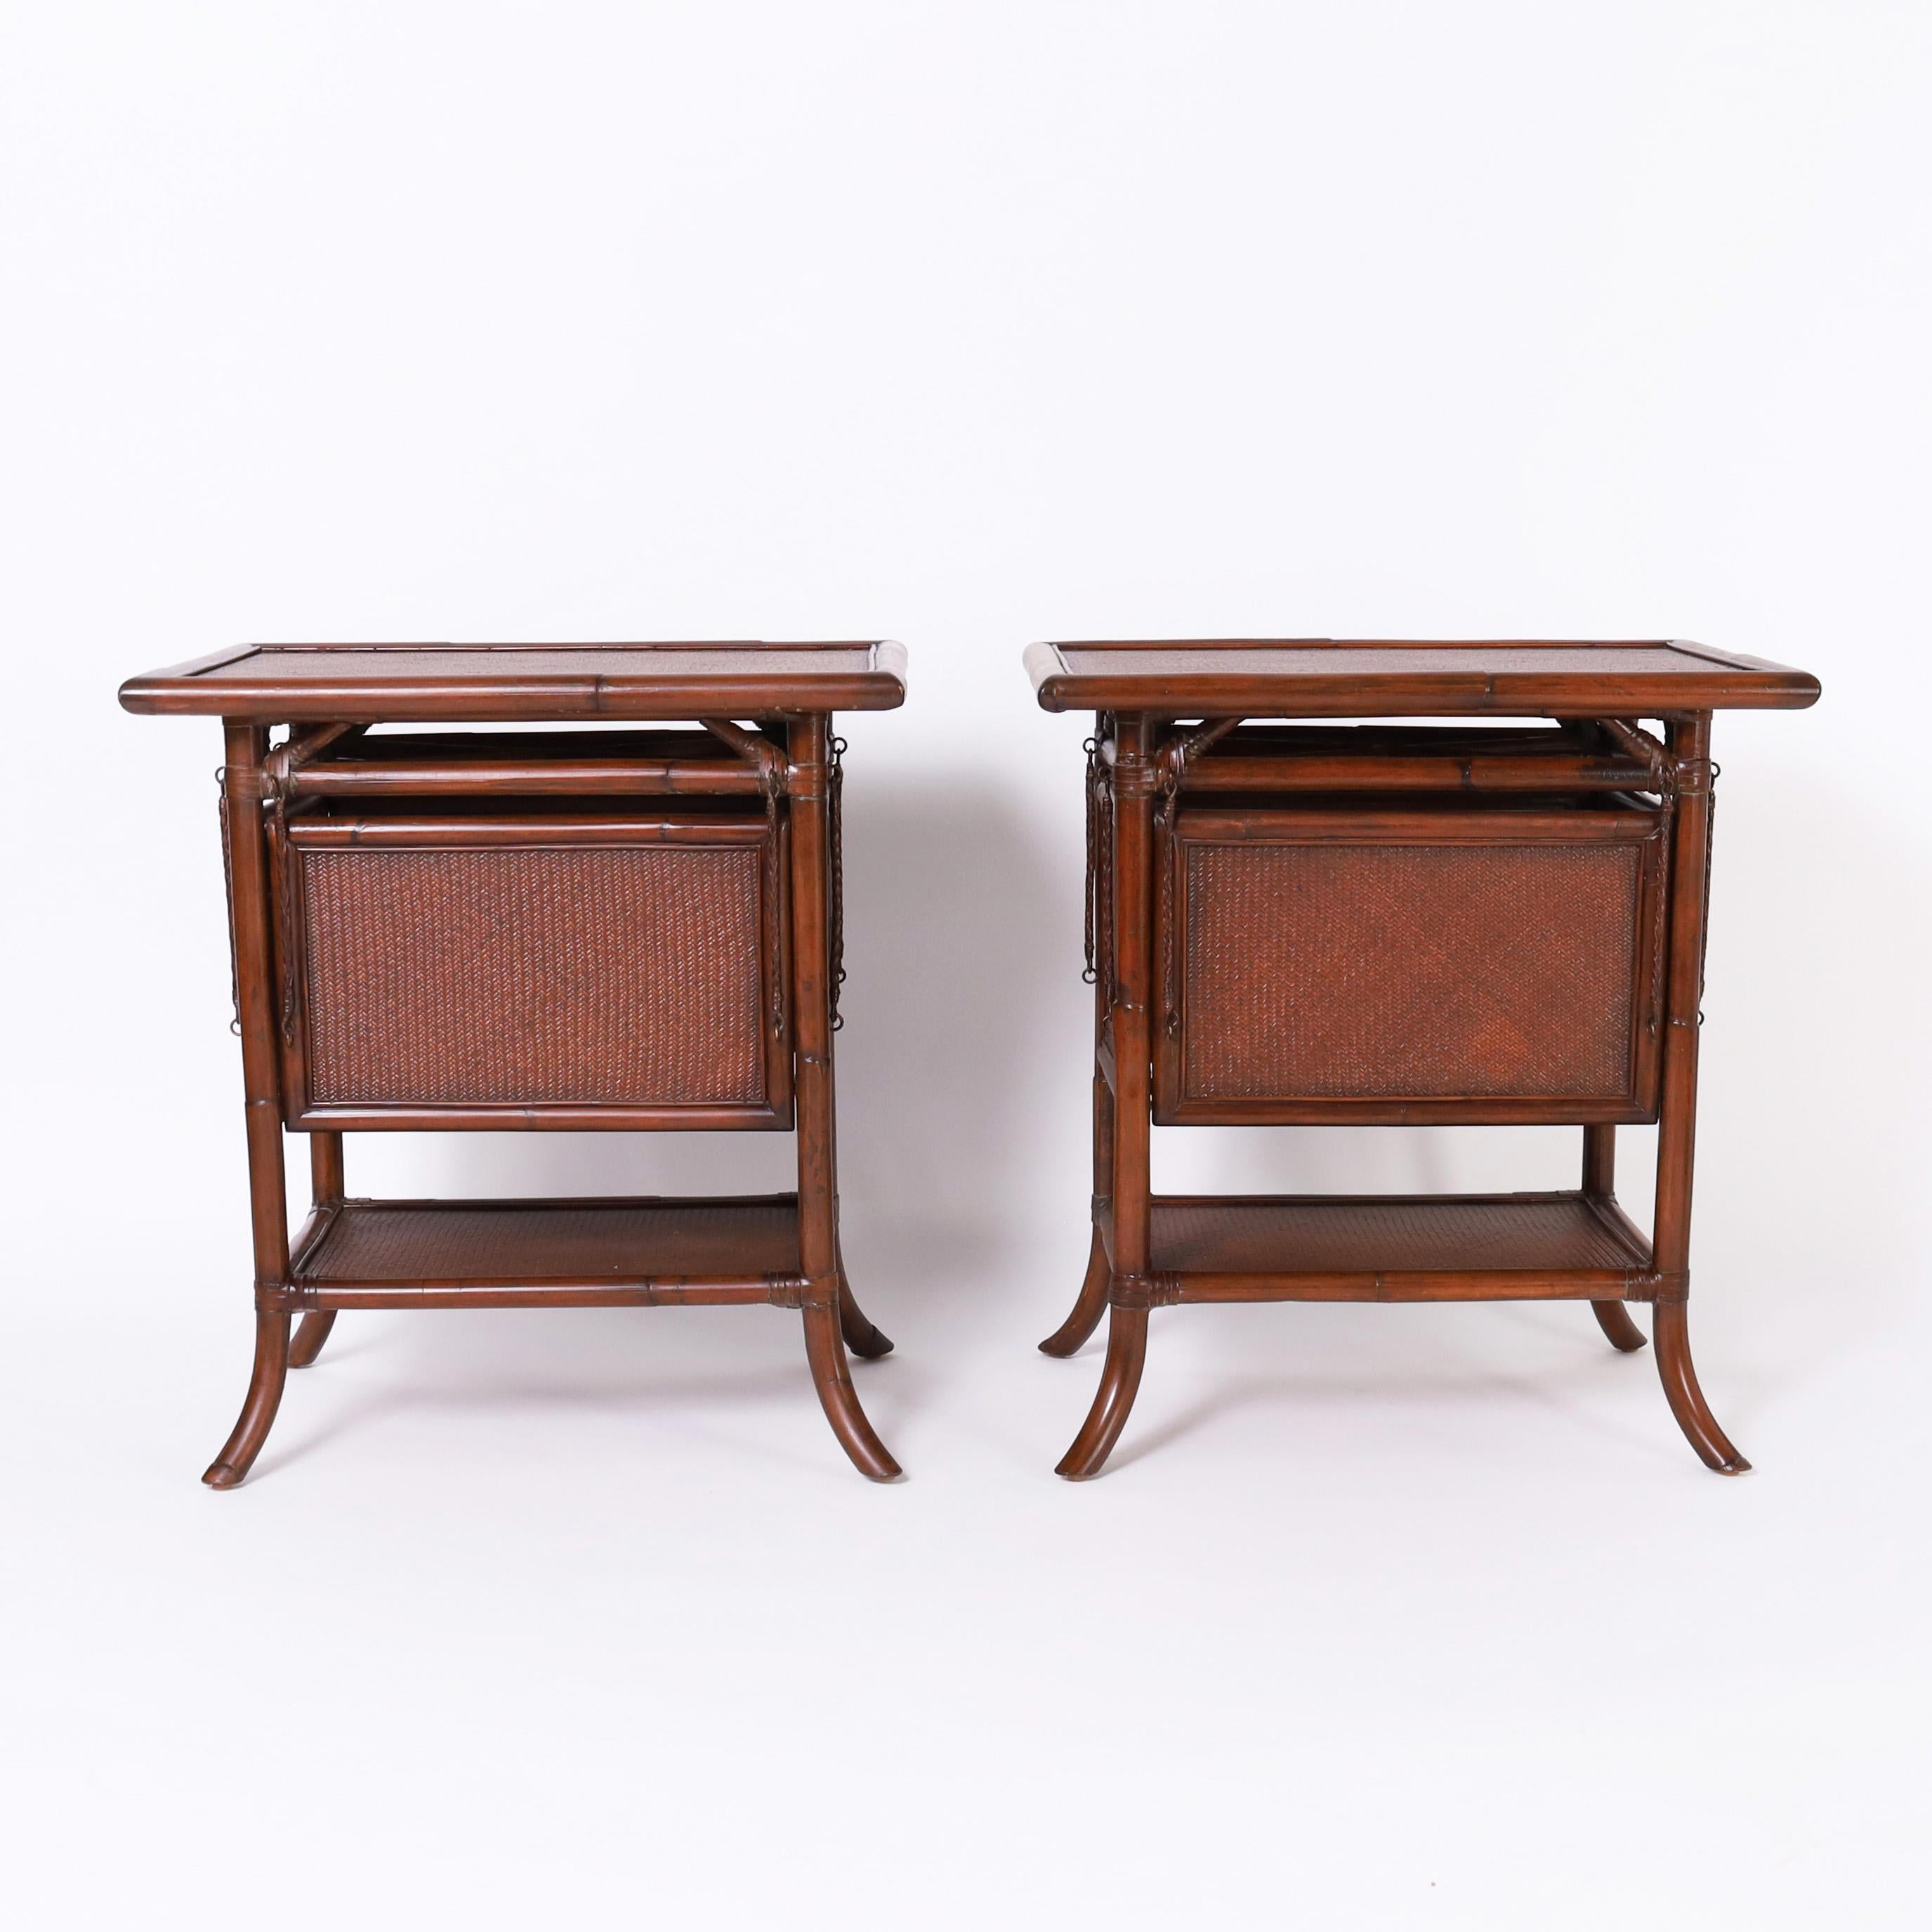 Impressive pair of mid century stands crafted in grasscloth and bamboo with four transforming foldout trays or surfaces, can be used with one, two, three, or all four.

Open dimensions- H: 28 W: 40 D: 34